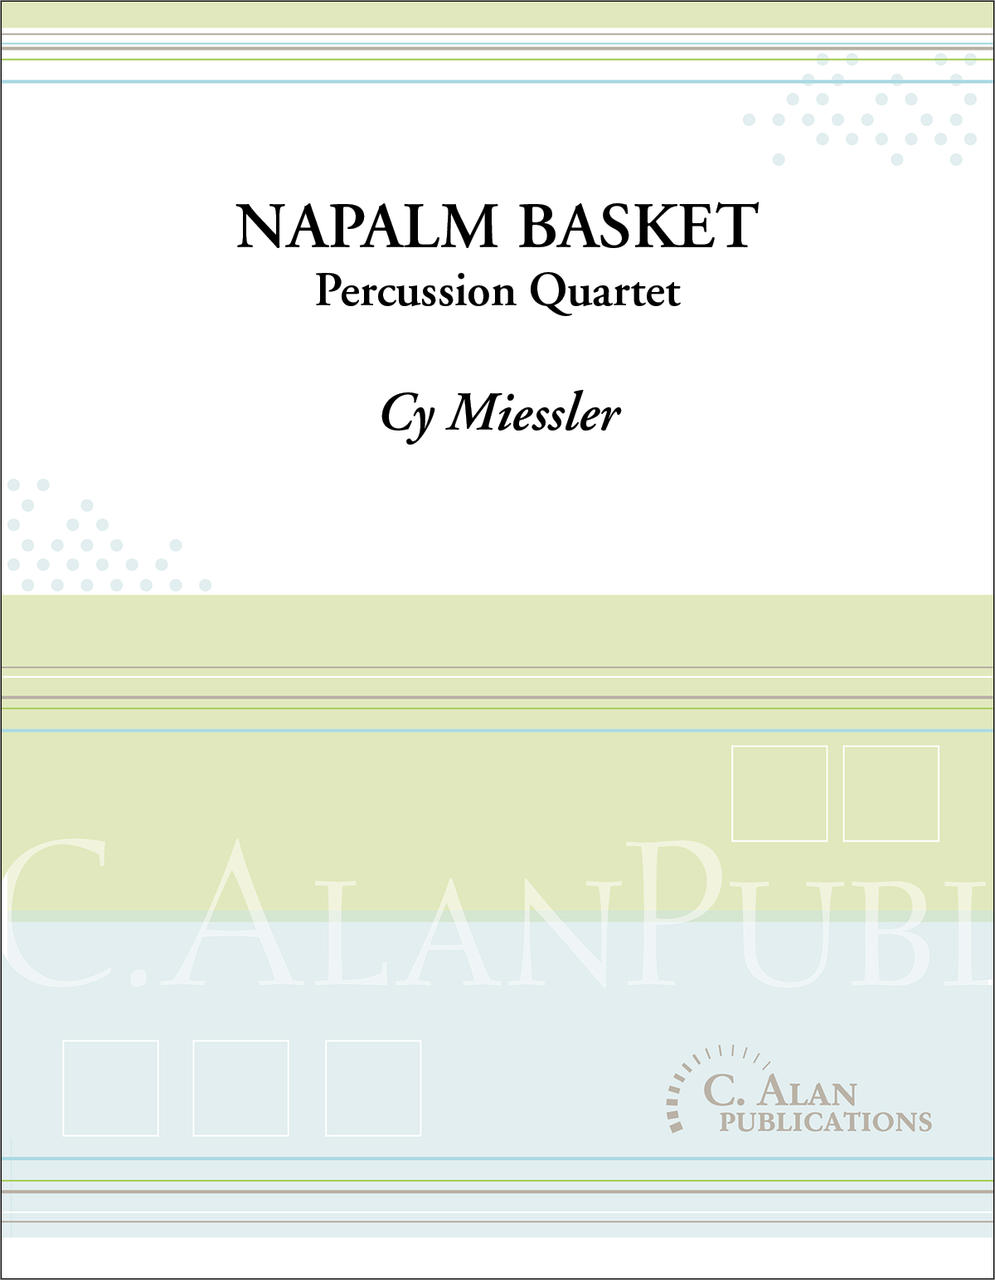 Napalm Basket by Cy Miessler